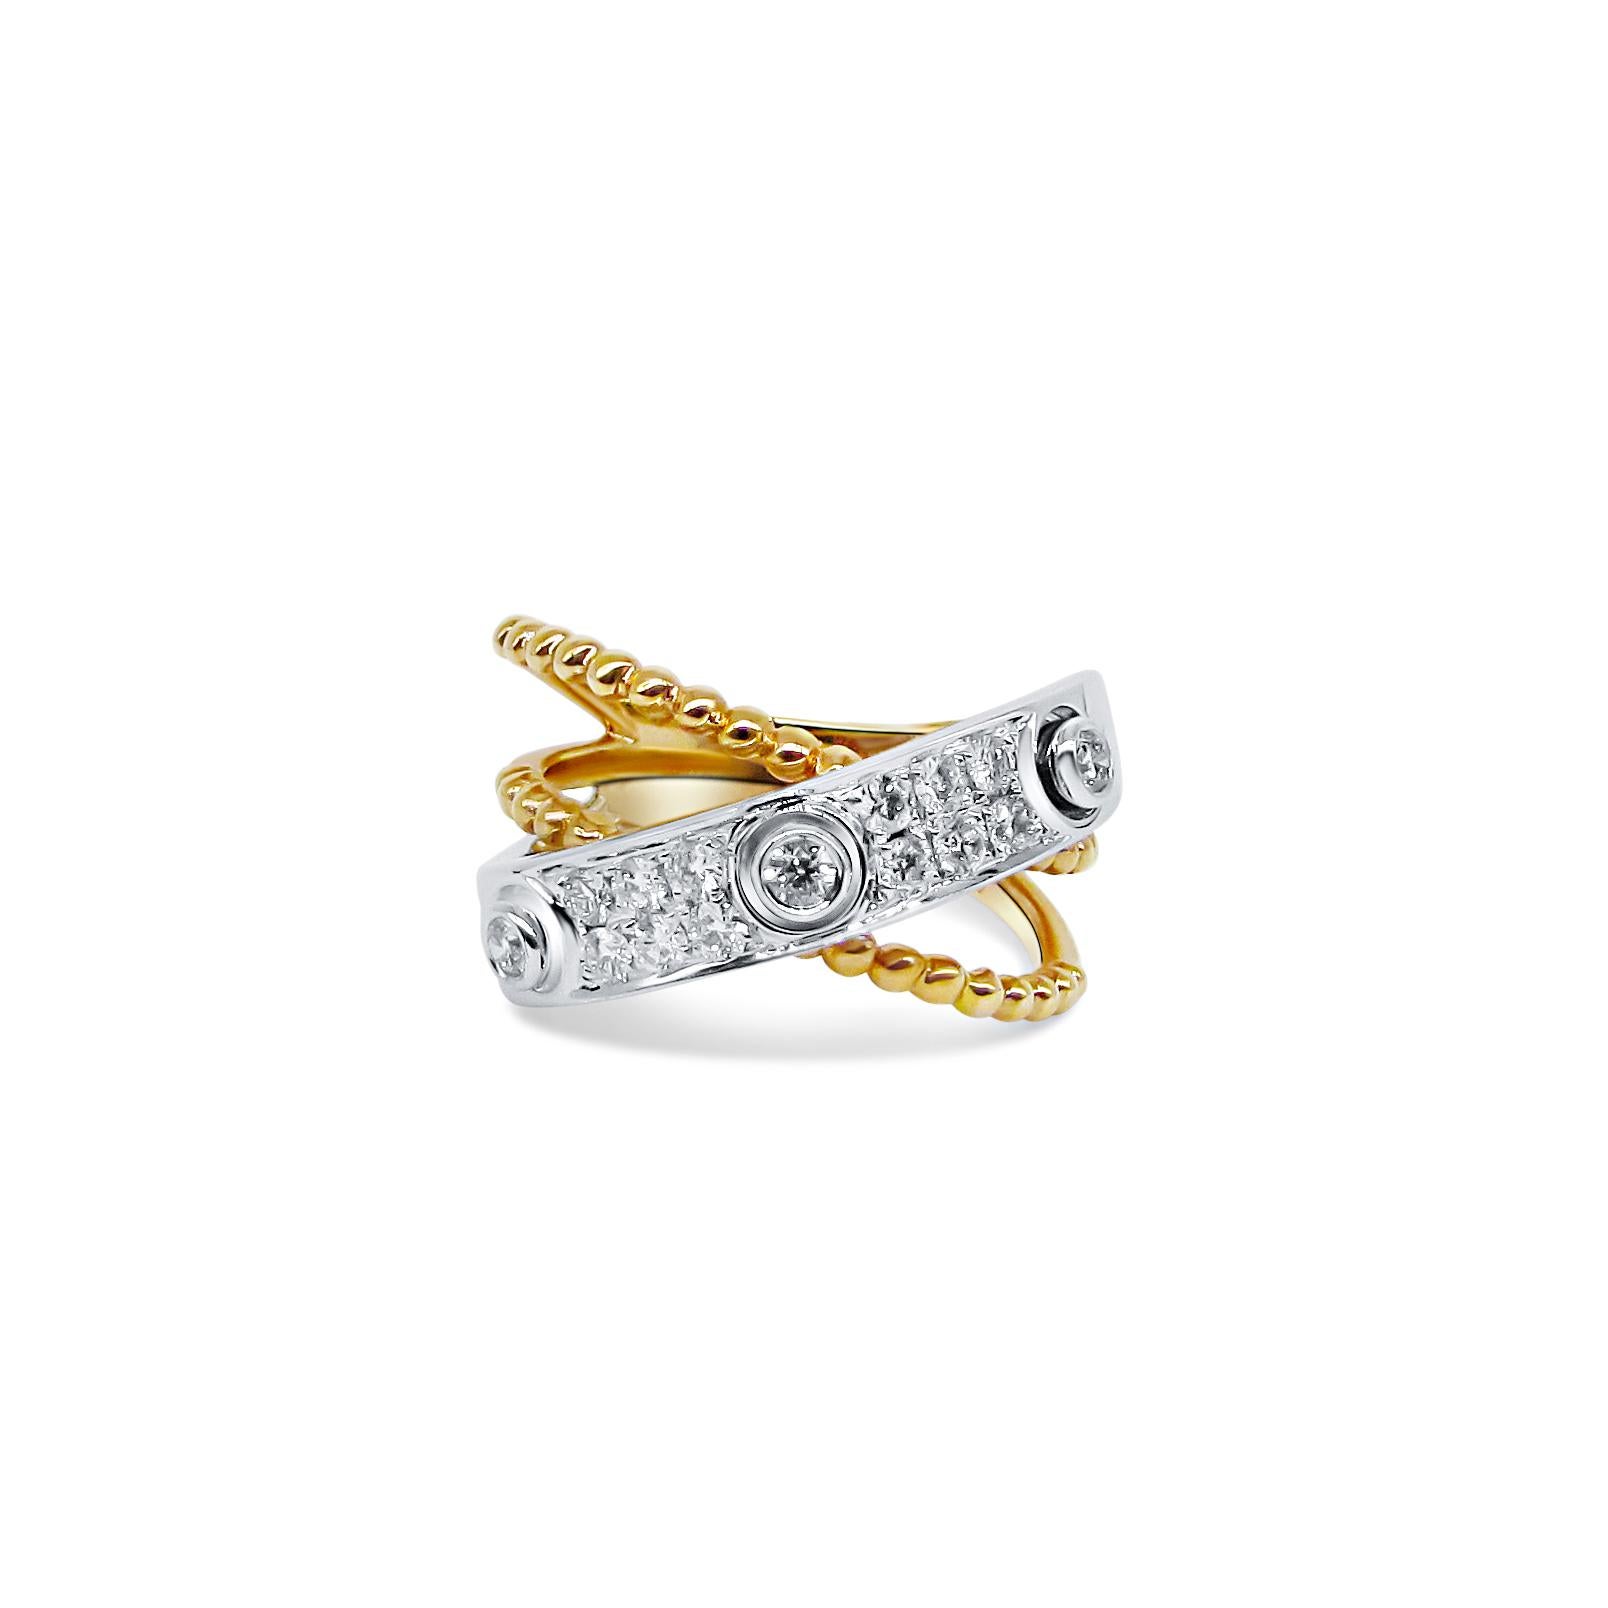 Total Ring Carat Weight: 0.40cts
Diamond Clarity: VS1
Diamond Color: G
Gold Purity: 18k
Gold Color: Rose/White
Gold Weight: 7.17g
Diamond Type: Natural Diamond, Conflict-Free

This piece has been designed and curated with a creative and artistic